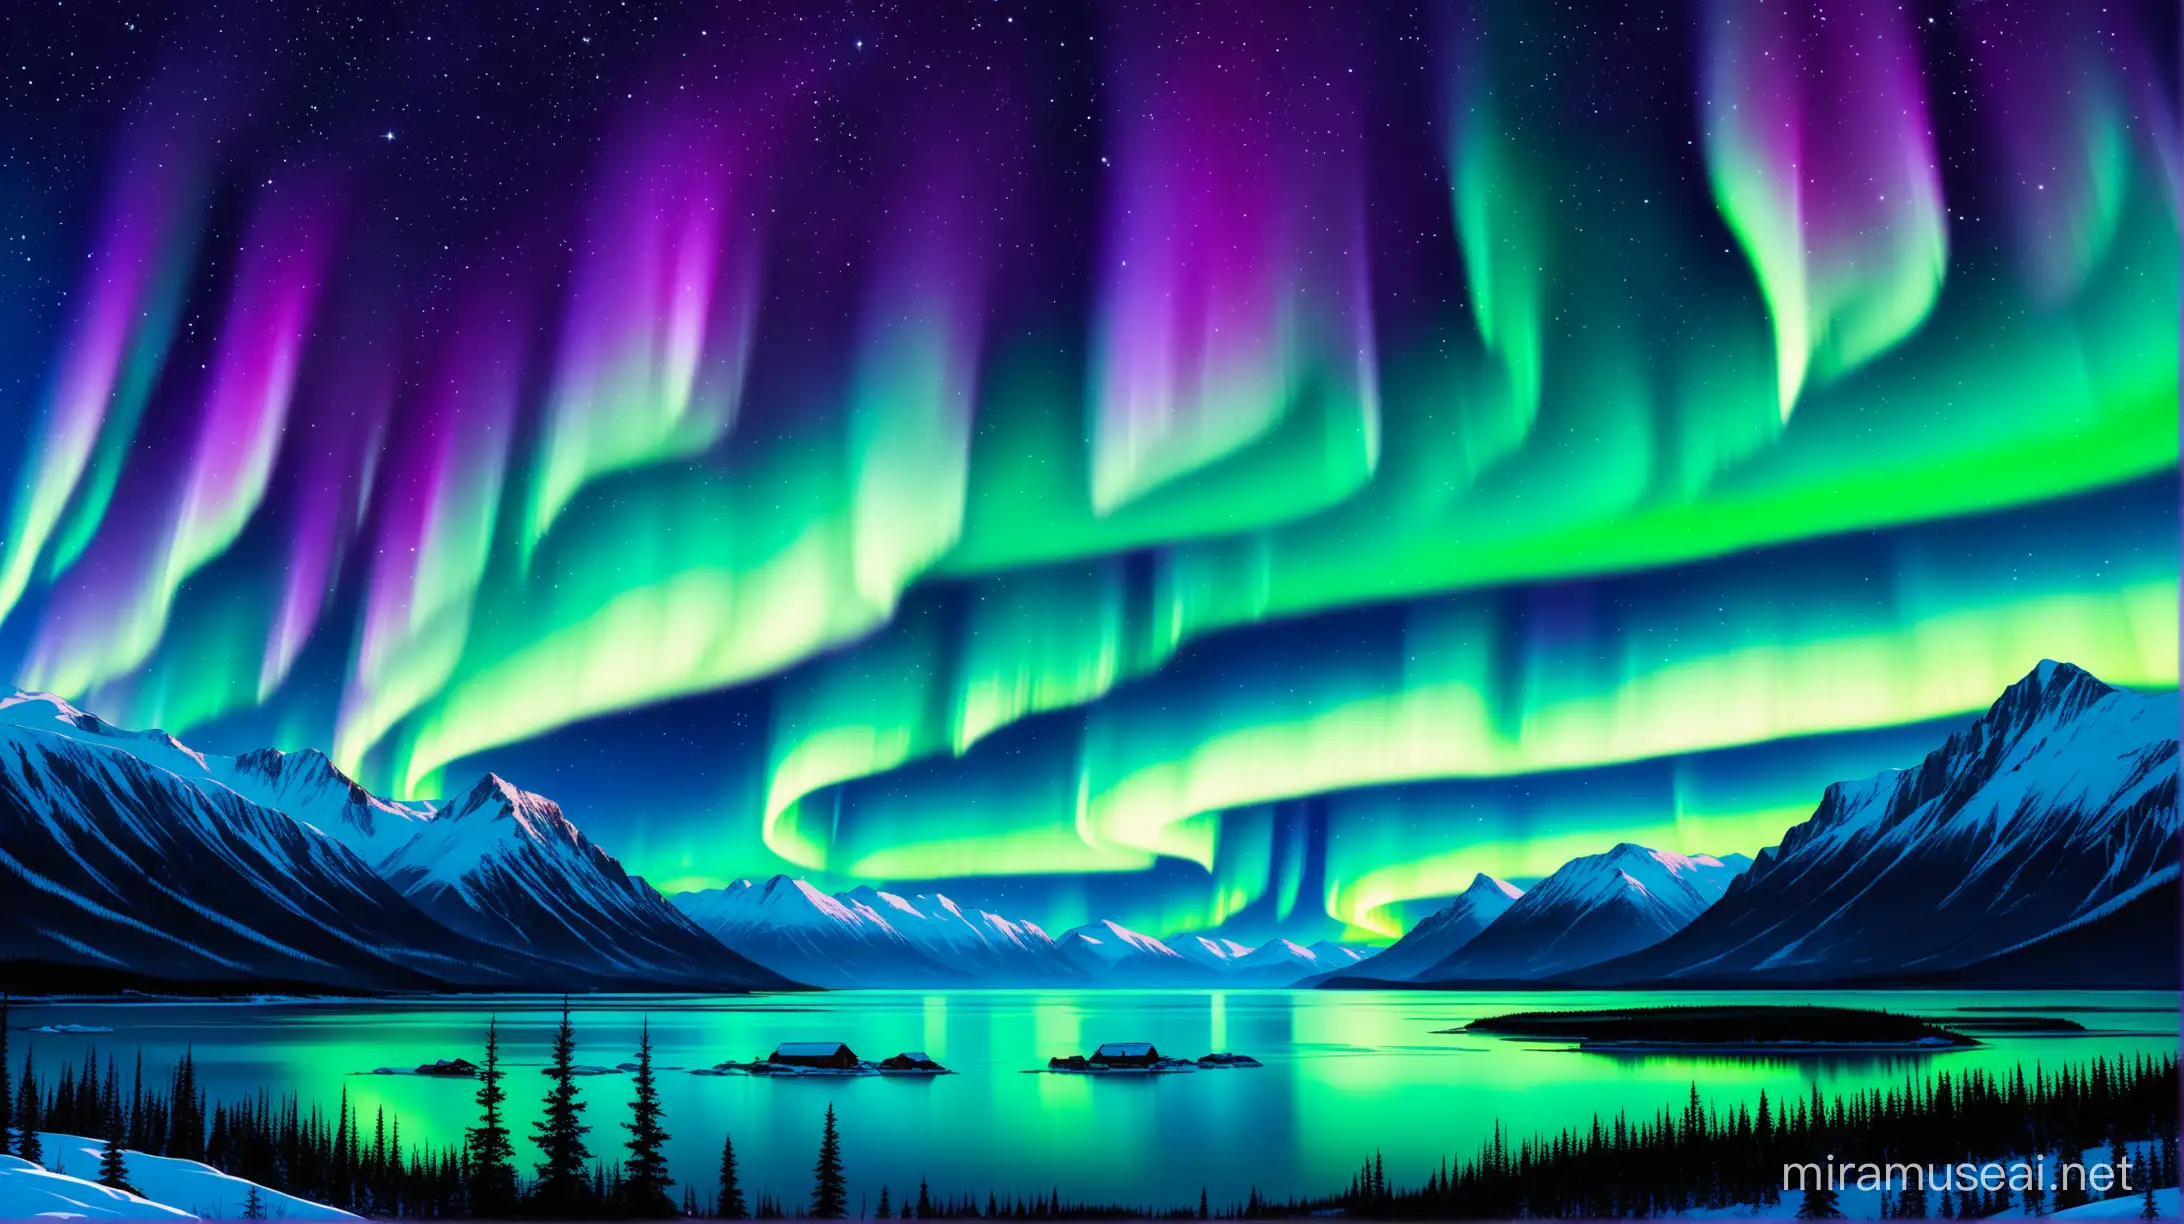 Aurora Borealis Display Over a Serene Lake with Reflective Teal and Violet Tones